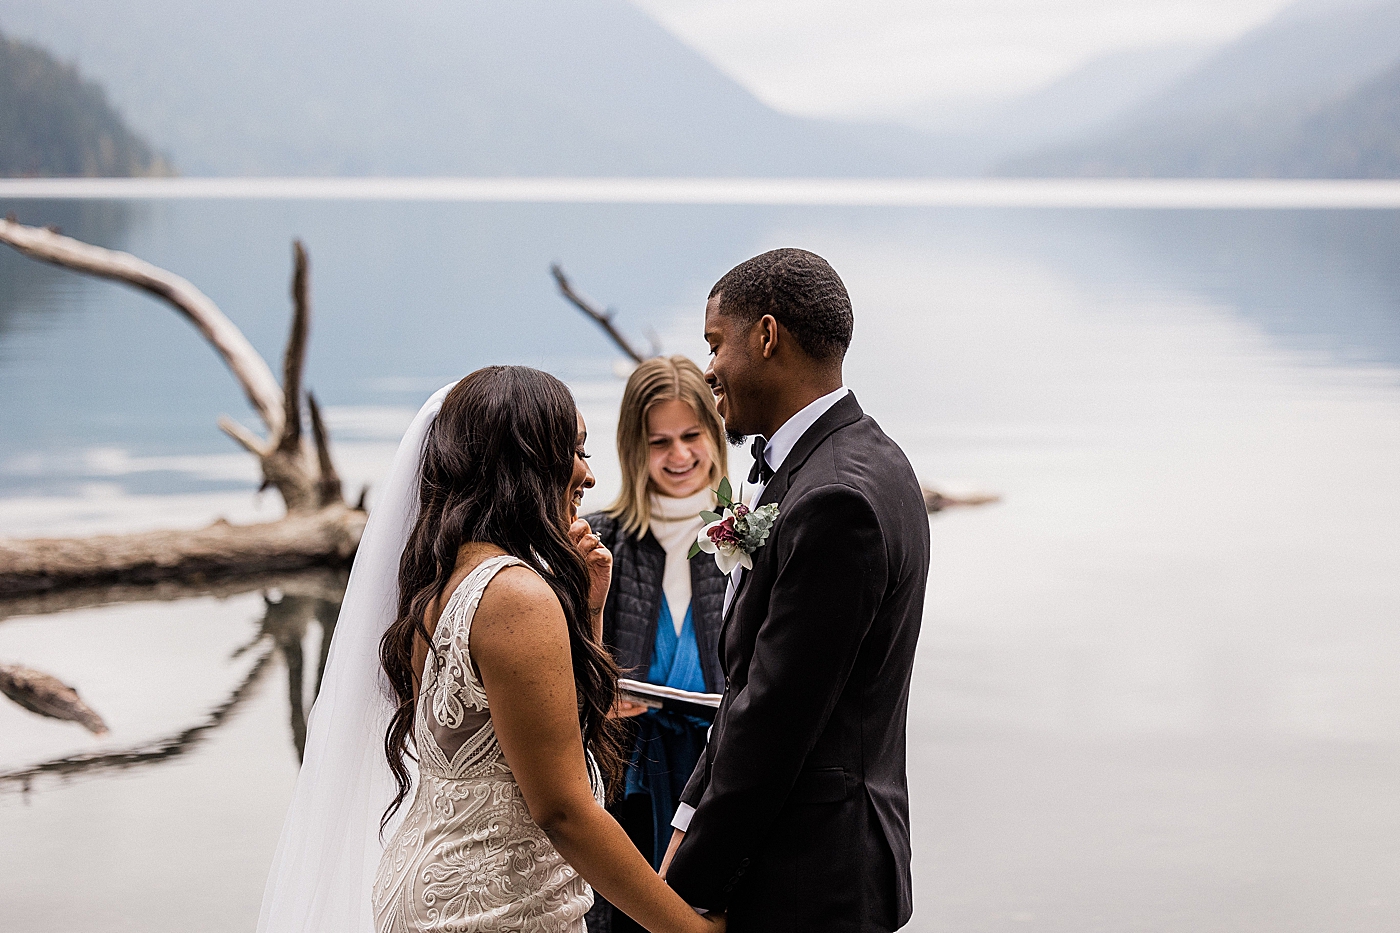 PNW Elopement at Lake Crescent with Megan Montalvo Photography